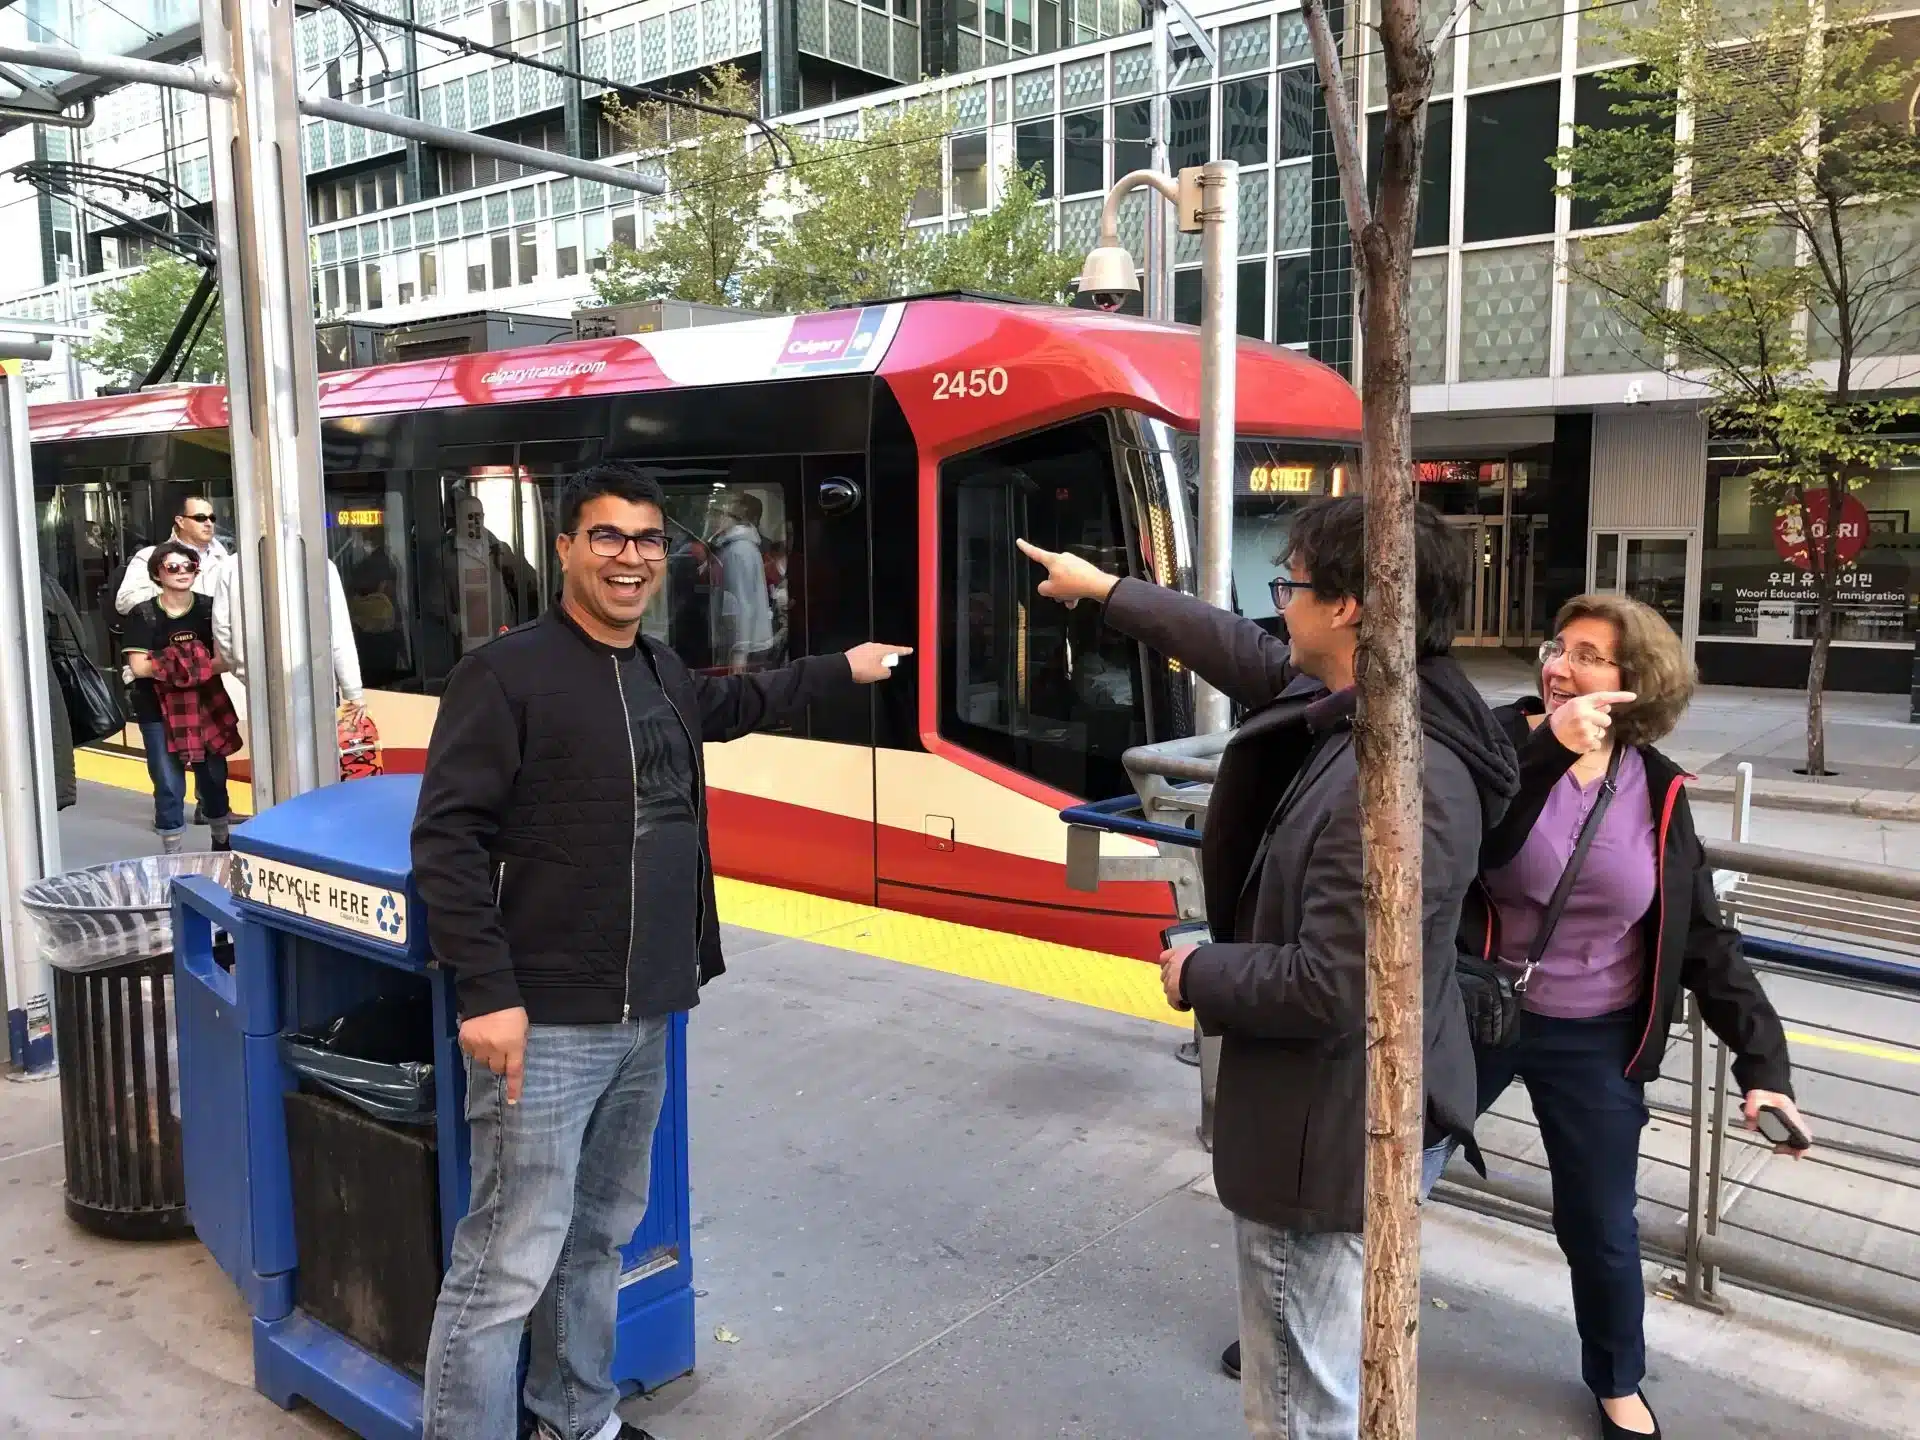 Corporate team points out the C-train in their Calgary Scavenger Hunt